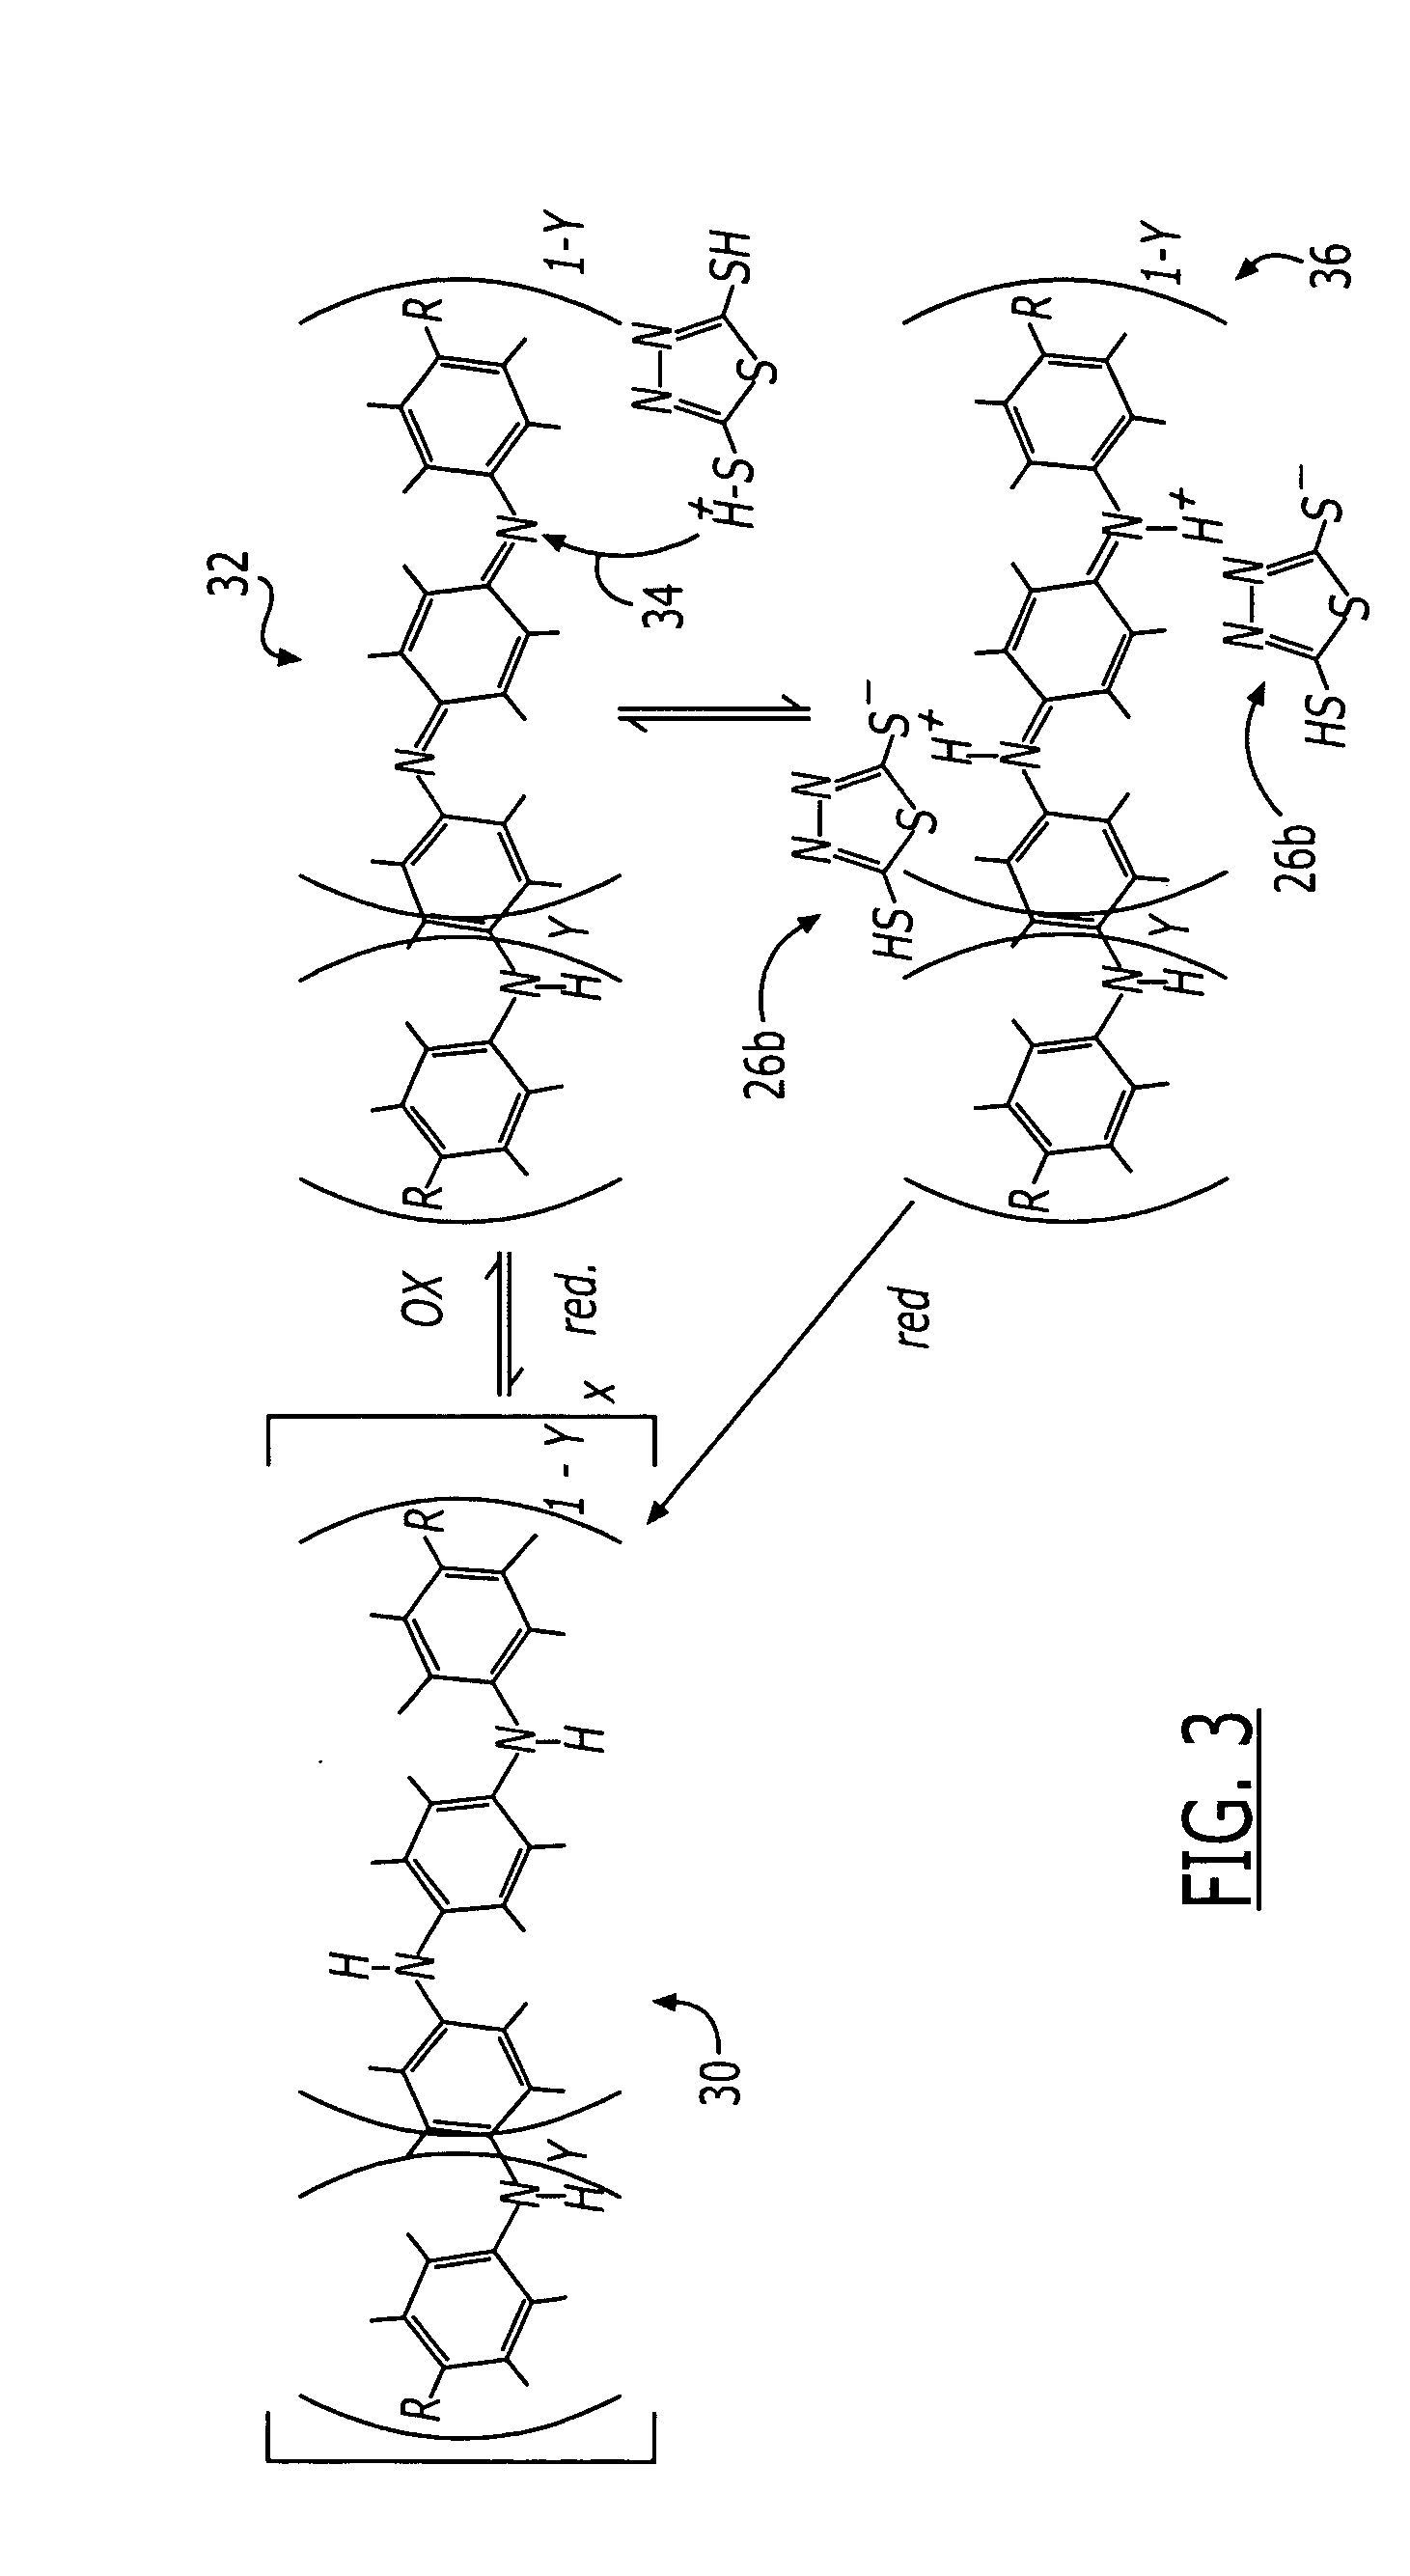 Composition for the controlled release of inhibitors for corrosion, biofouling, and scaling